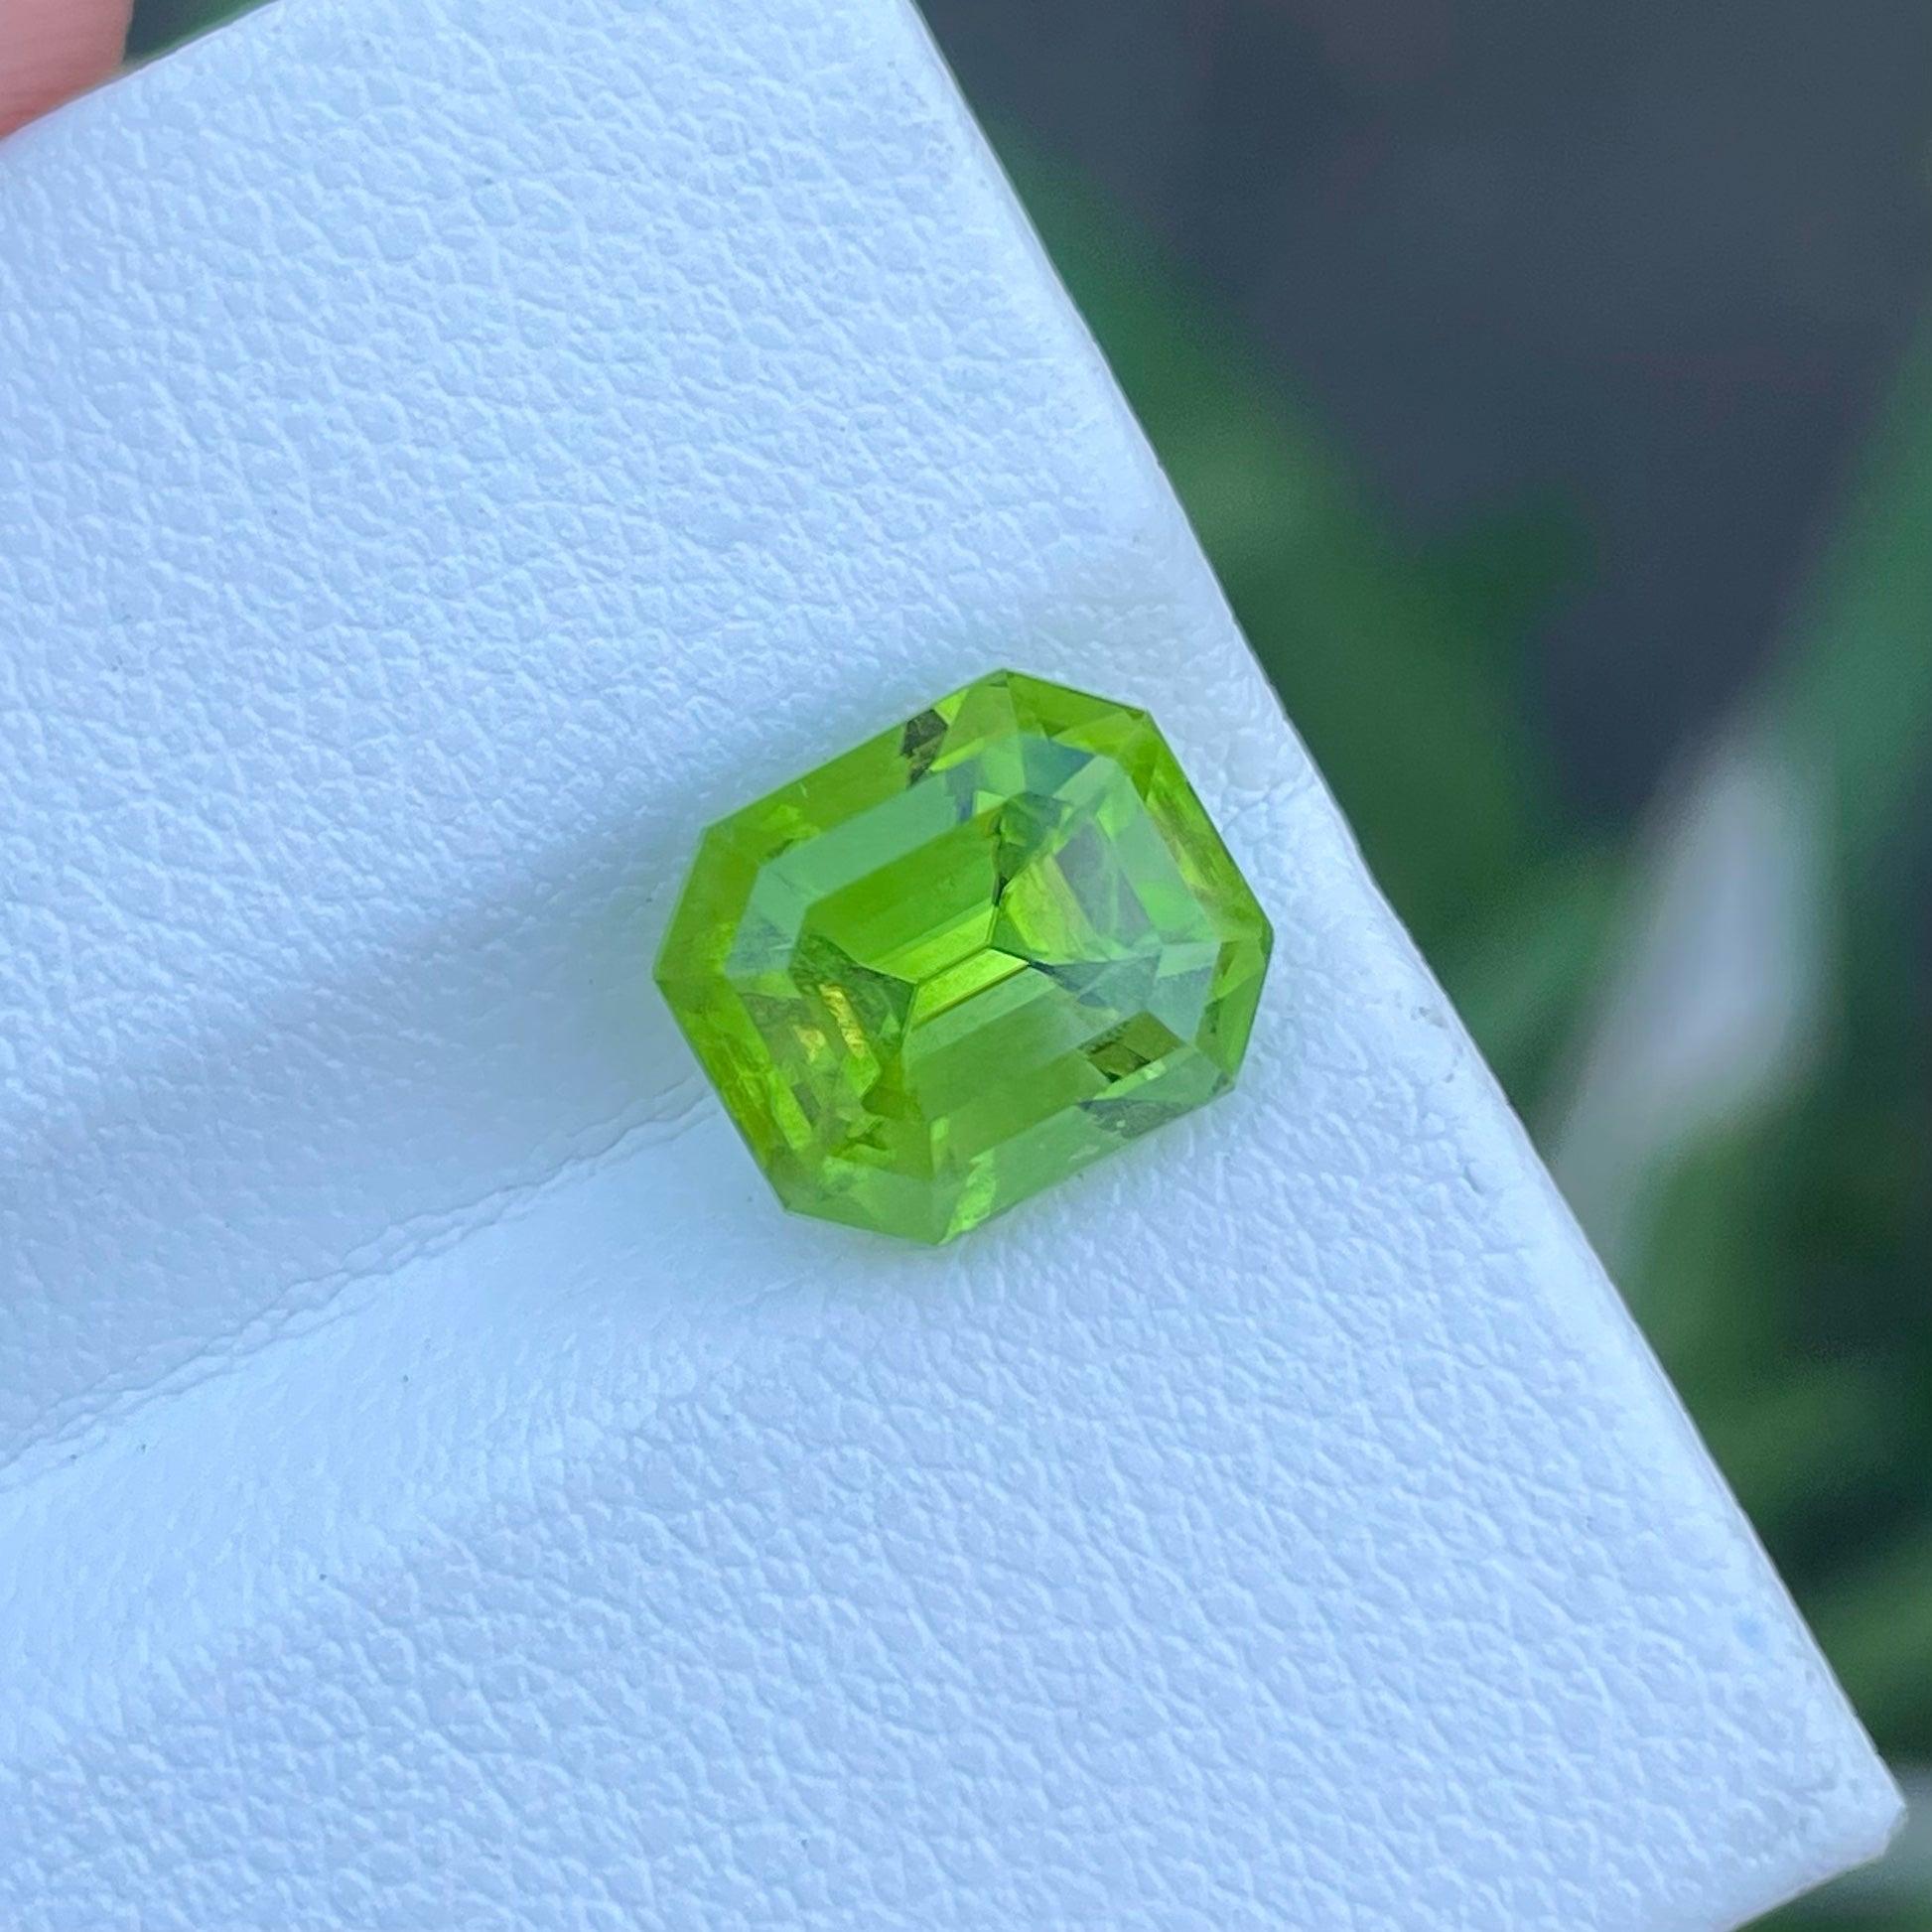 Spectacular Natural Green Peridot Gemstone, Available for Sale at wholesale price natural high quality 4.82 carats VVS Clarity loose Peridot from Pakistan.

 

Product Information:
GEMSTONE TYPE:	Spectacular Natural Green Peridot